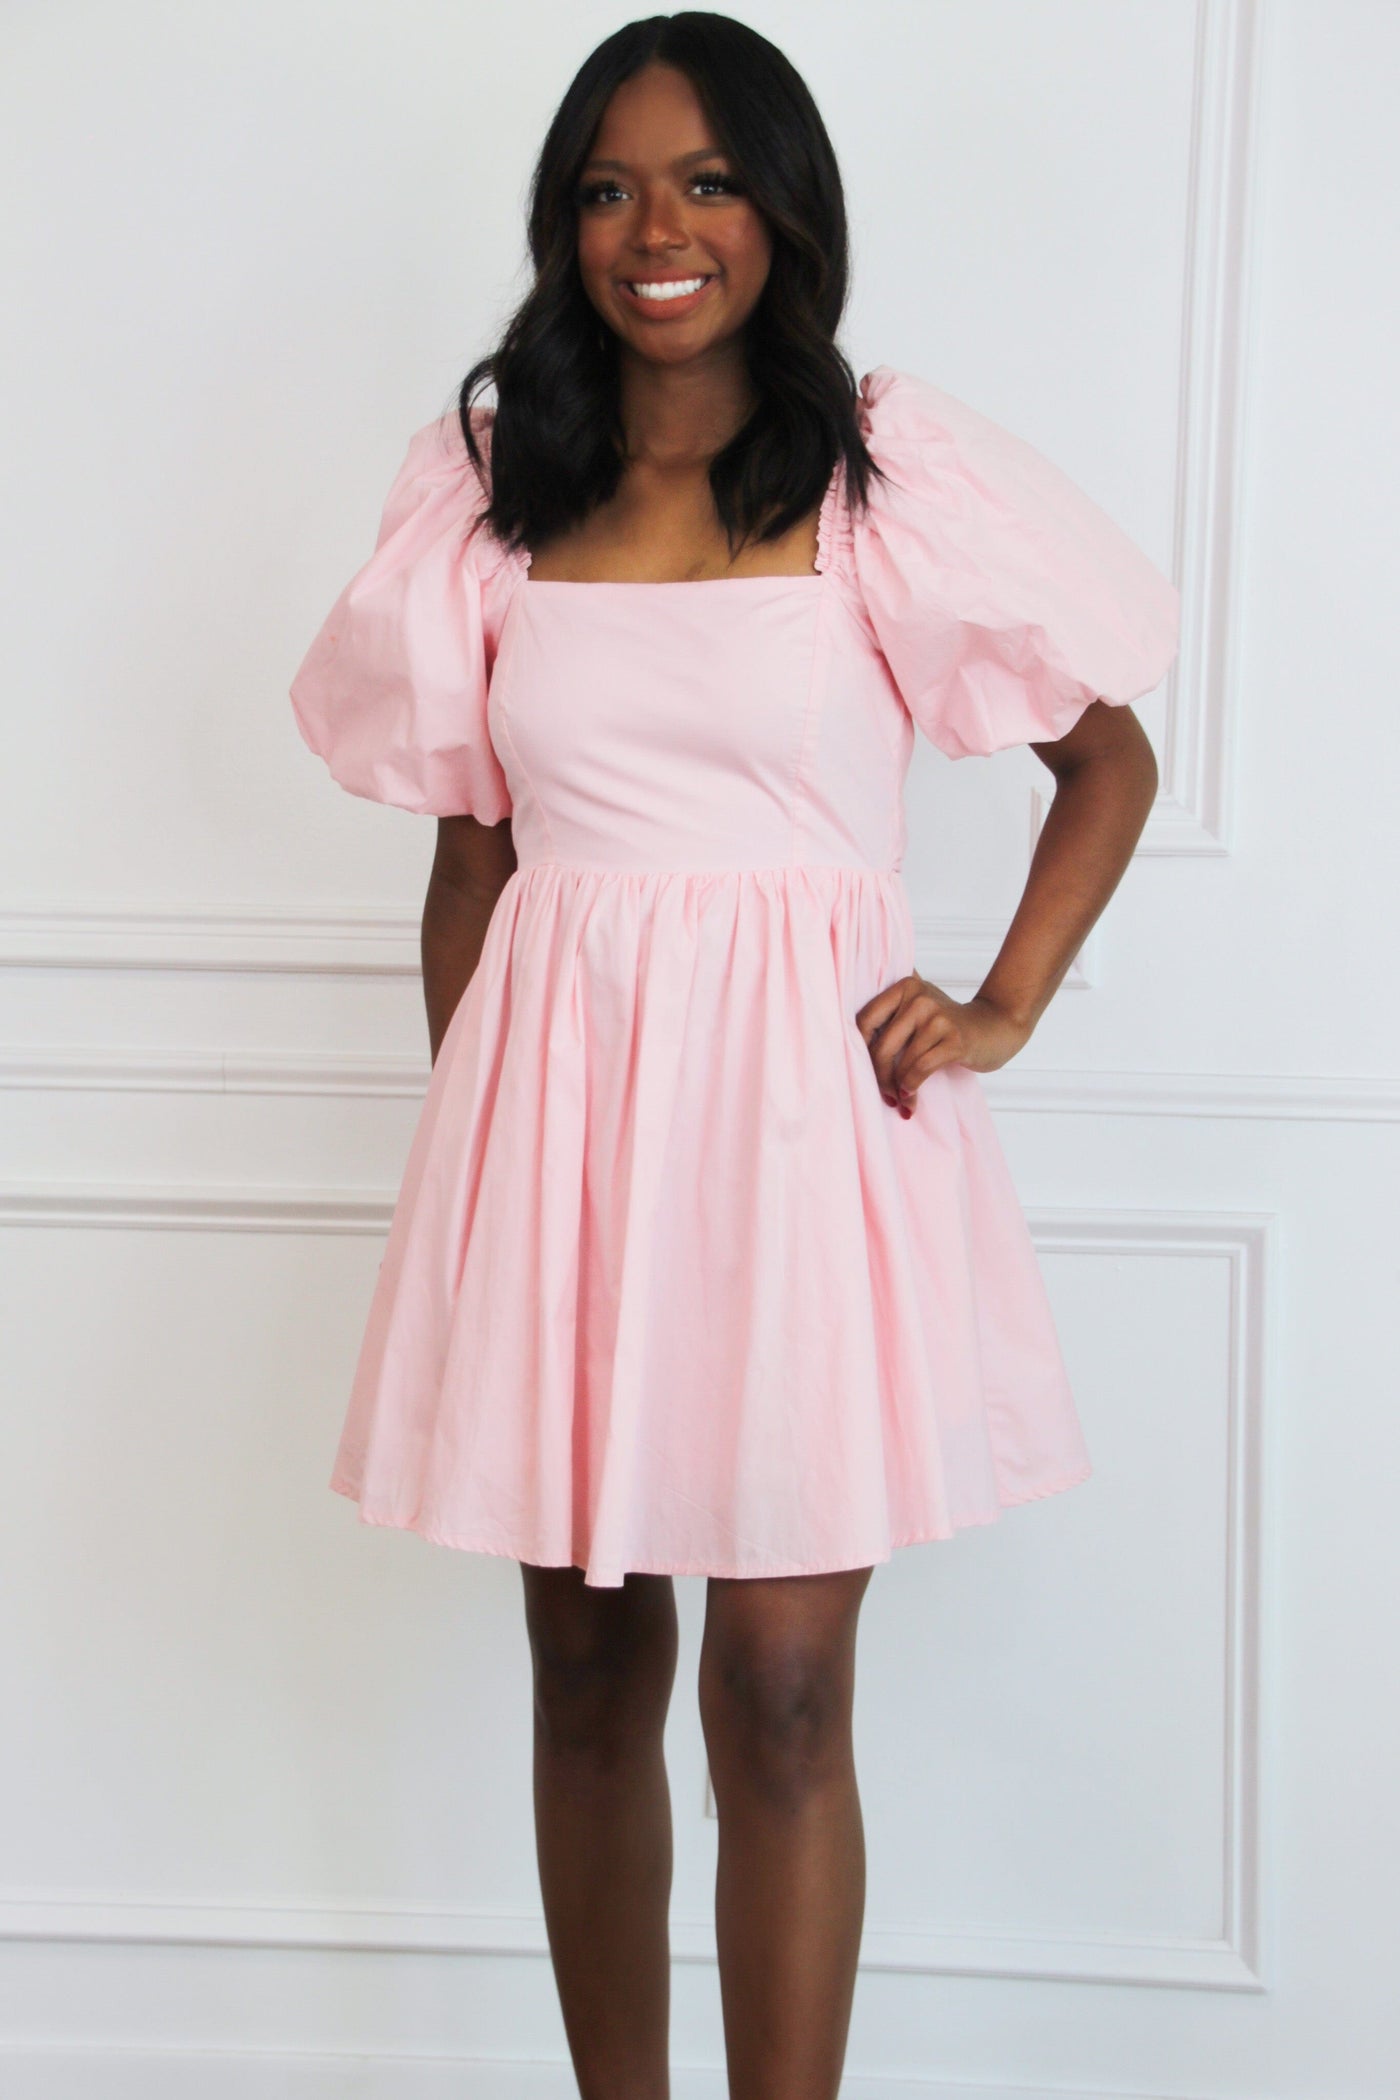 Bella and Bloom Boutique - Unmistakeable Feeling Babydoll Dress